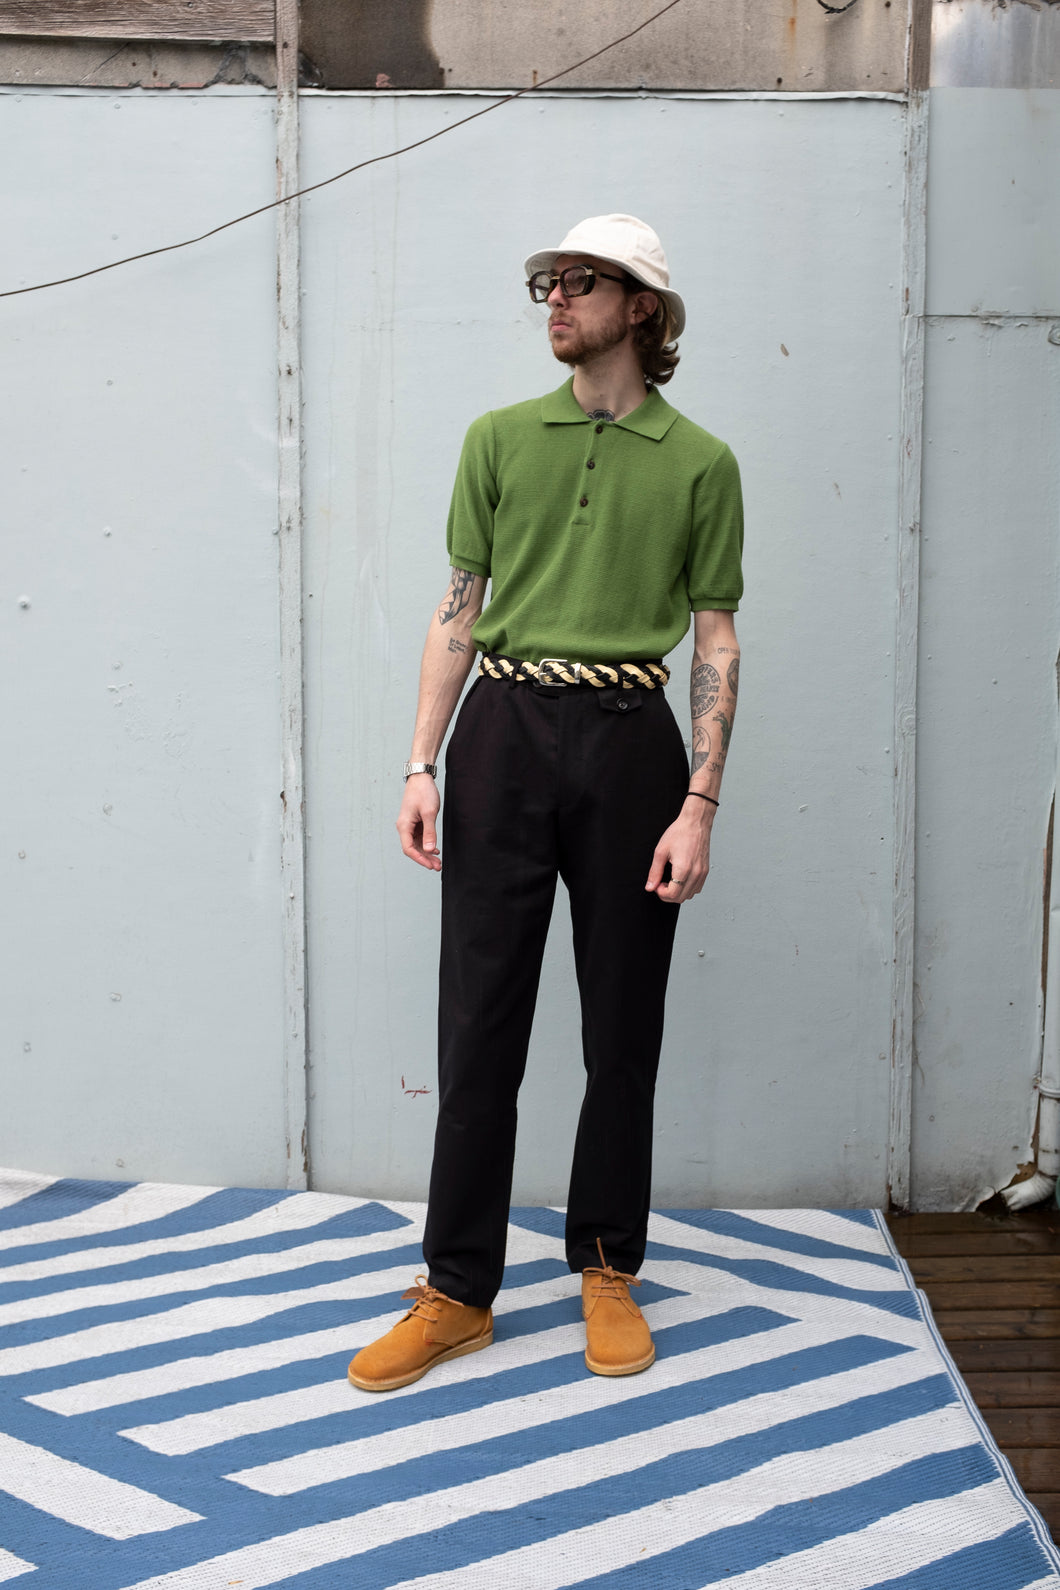 Fish tail back trousers with braces | Mens outfits, Well dressed men, Mens  fashion vintage